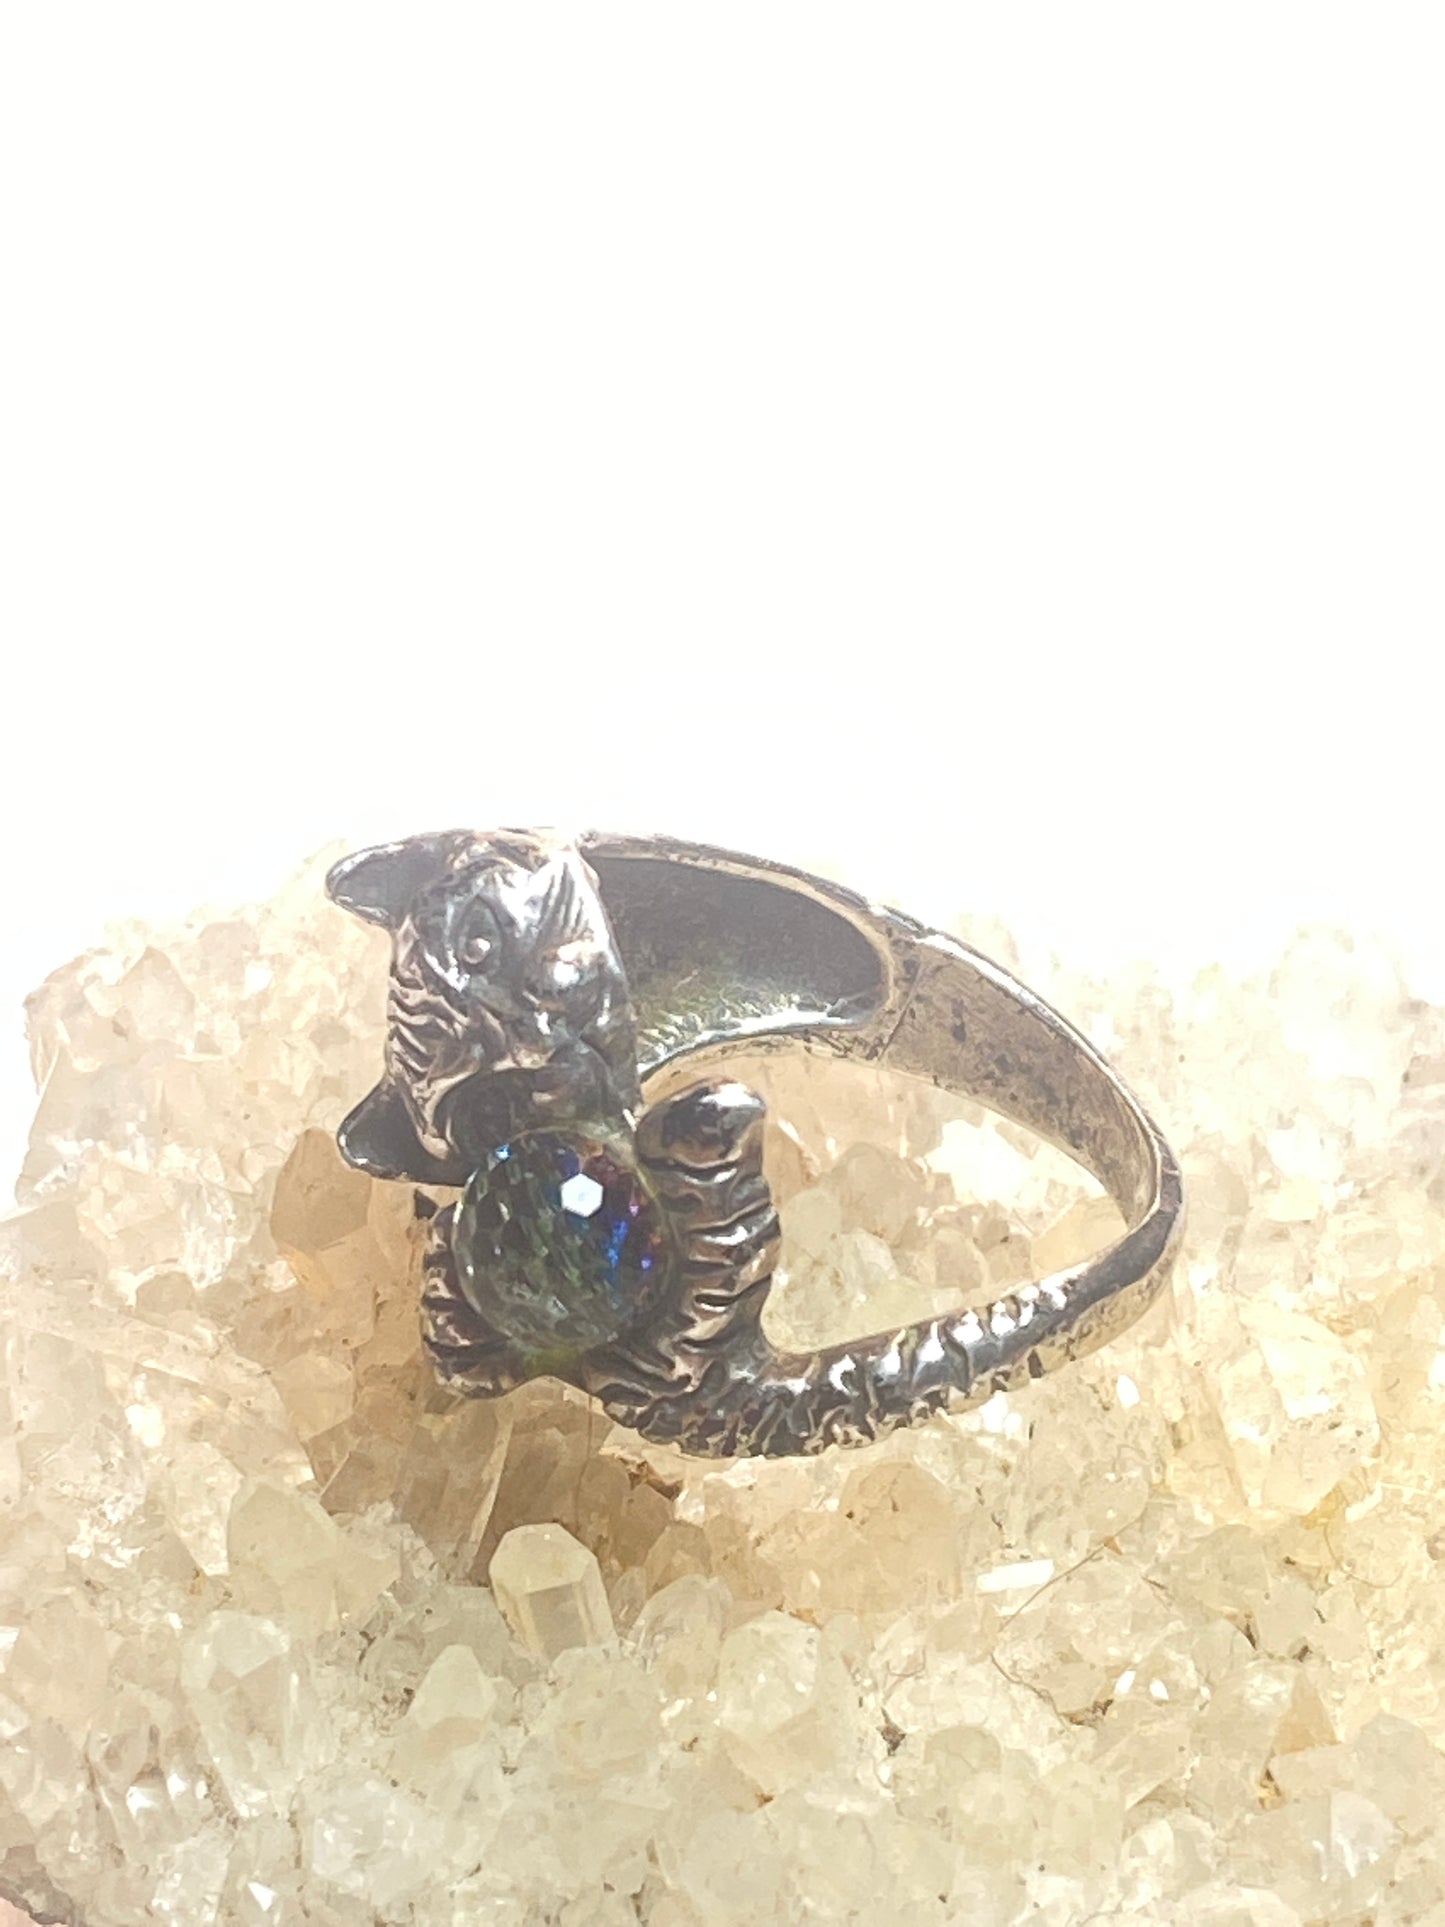 Cat ring size 5.50 animal band pinky sterling silver women